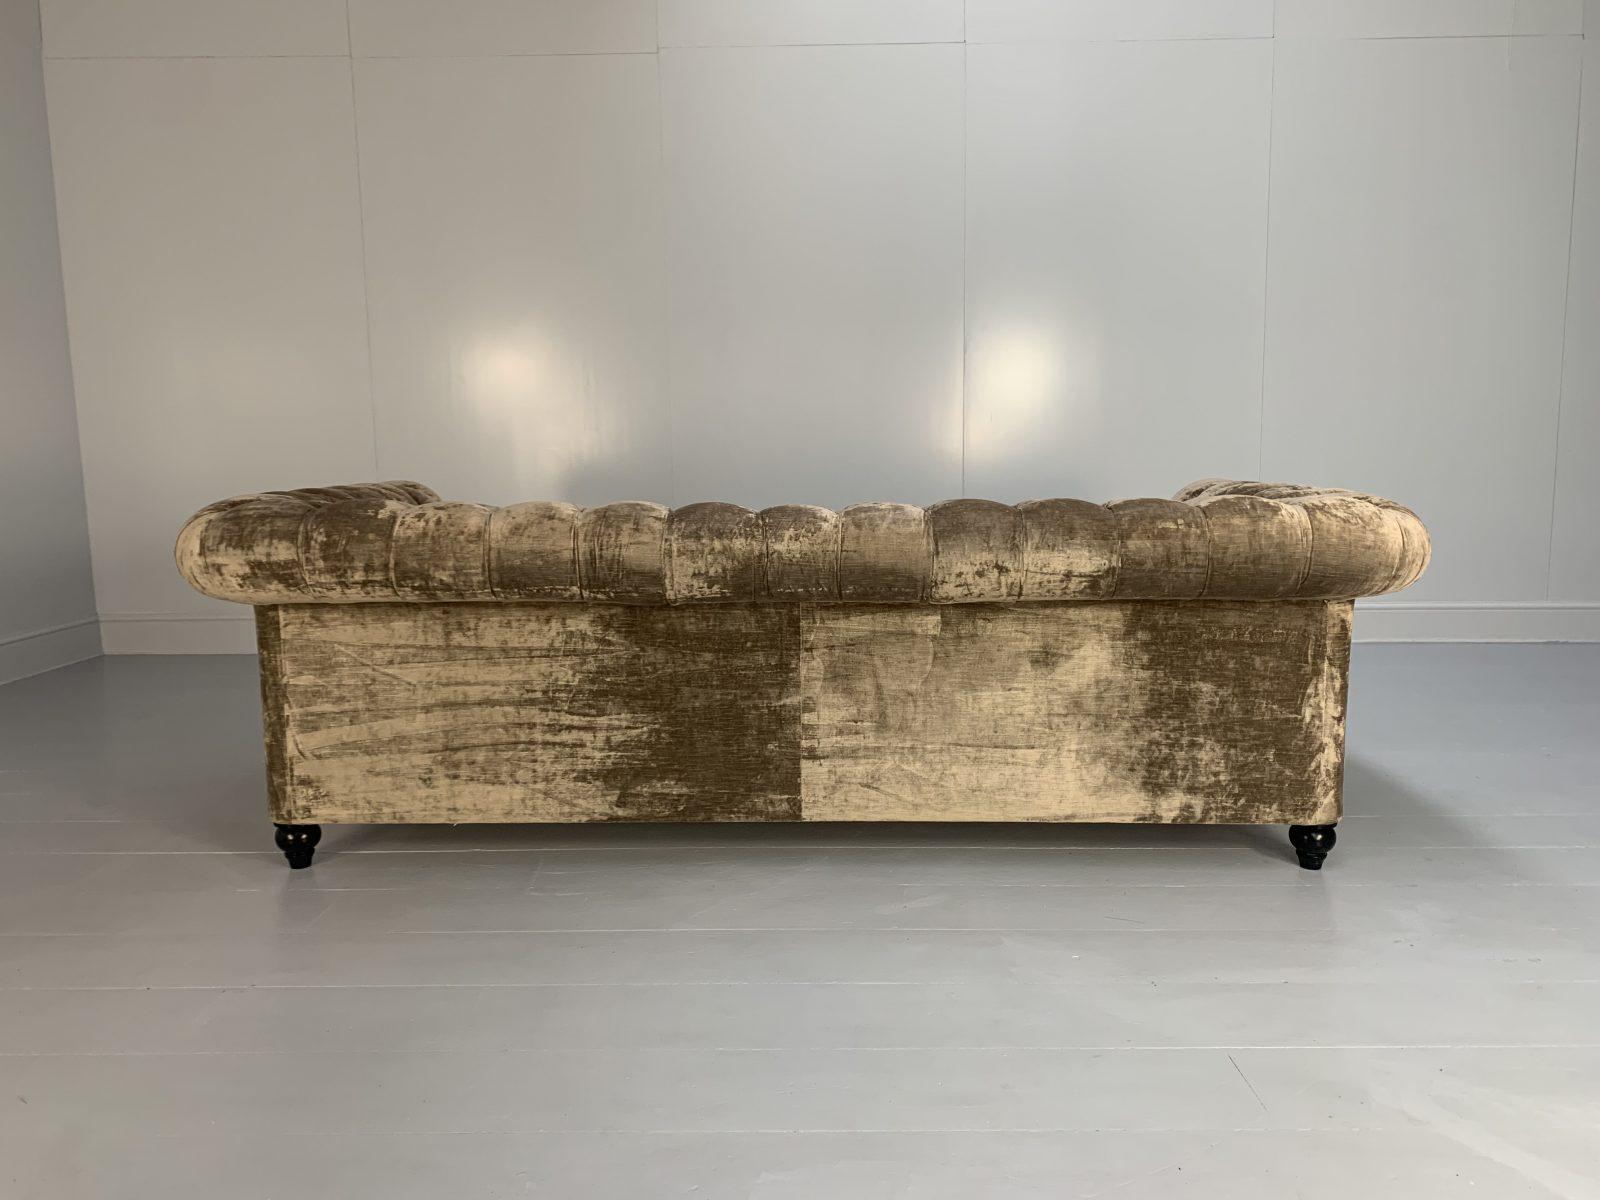 Duresta “Connaught” Grand Chesterfield Sofa – In Pale Gold Mink Brown “Rembrandt 3